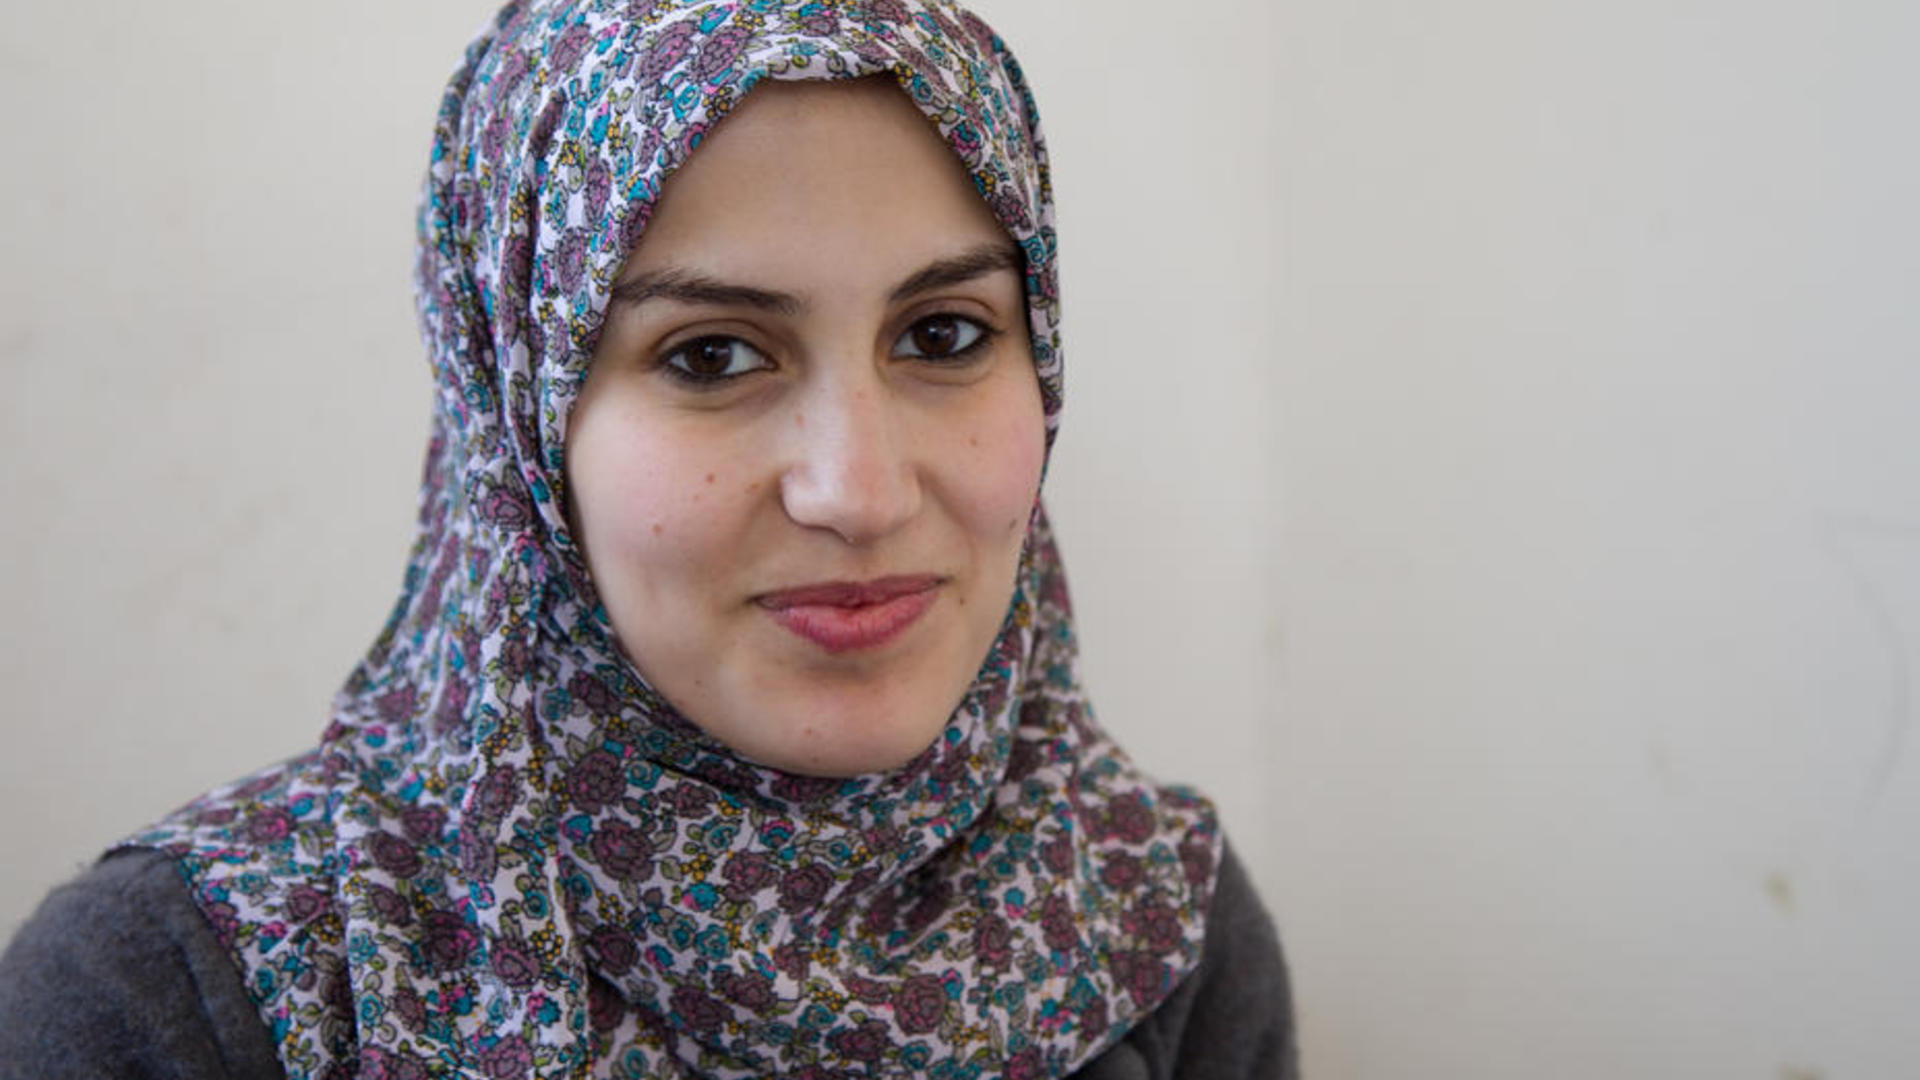 Samah, 23, was eager to start a new life with her family. 